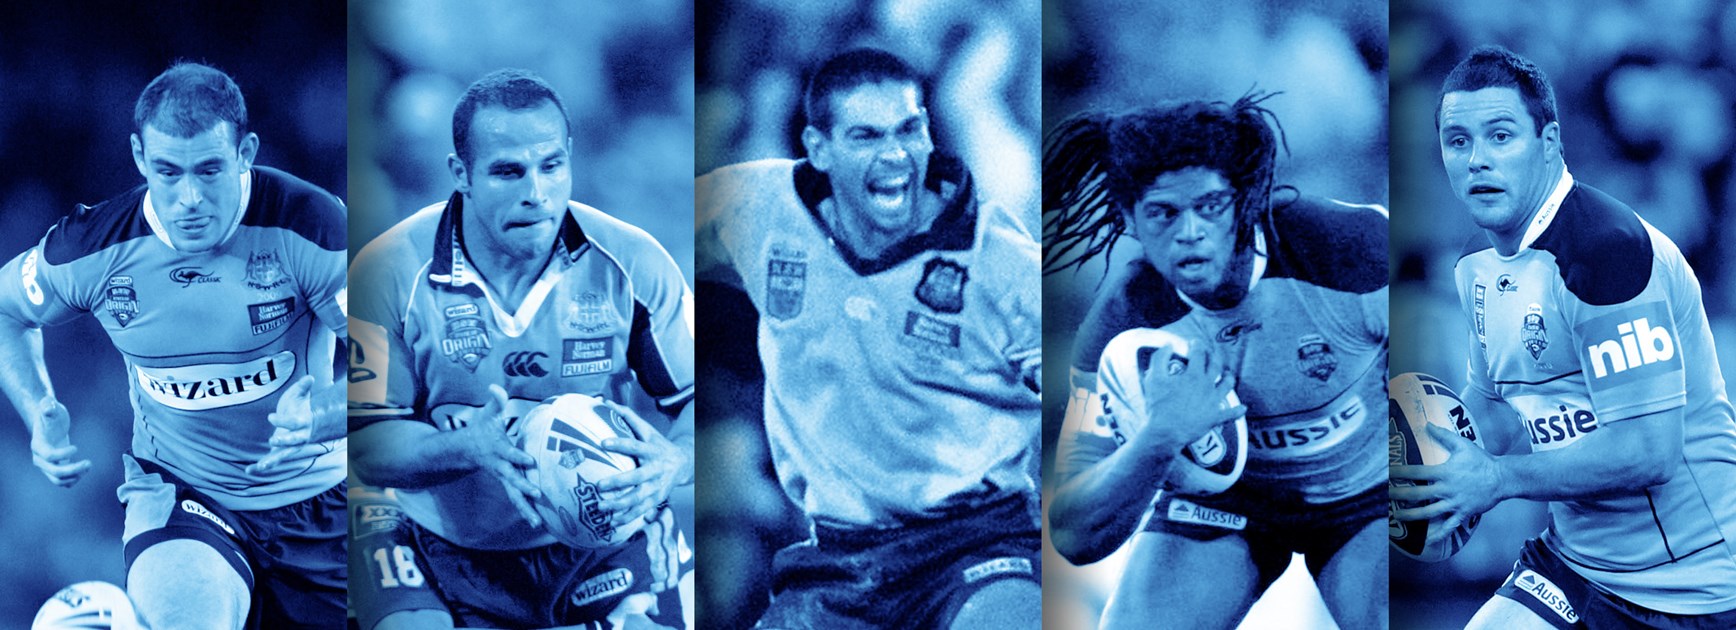 Tommy, the Peach and Horrie among NSW Blues' one-game wonders